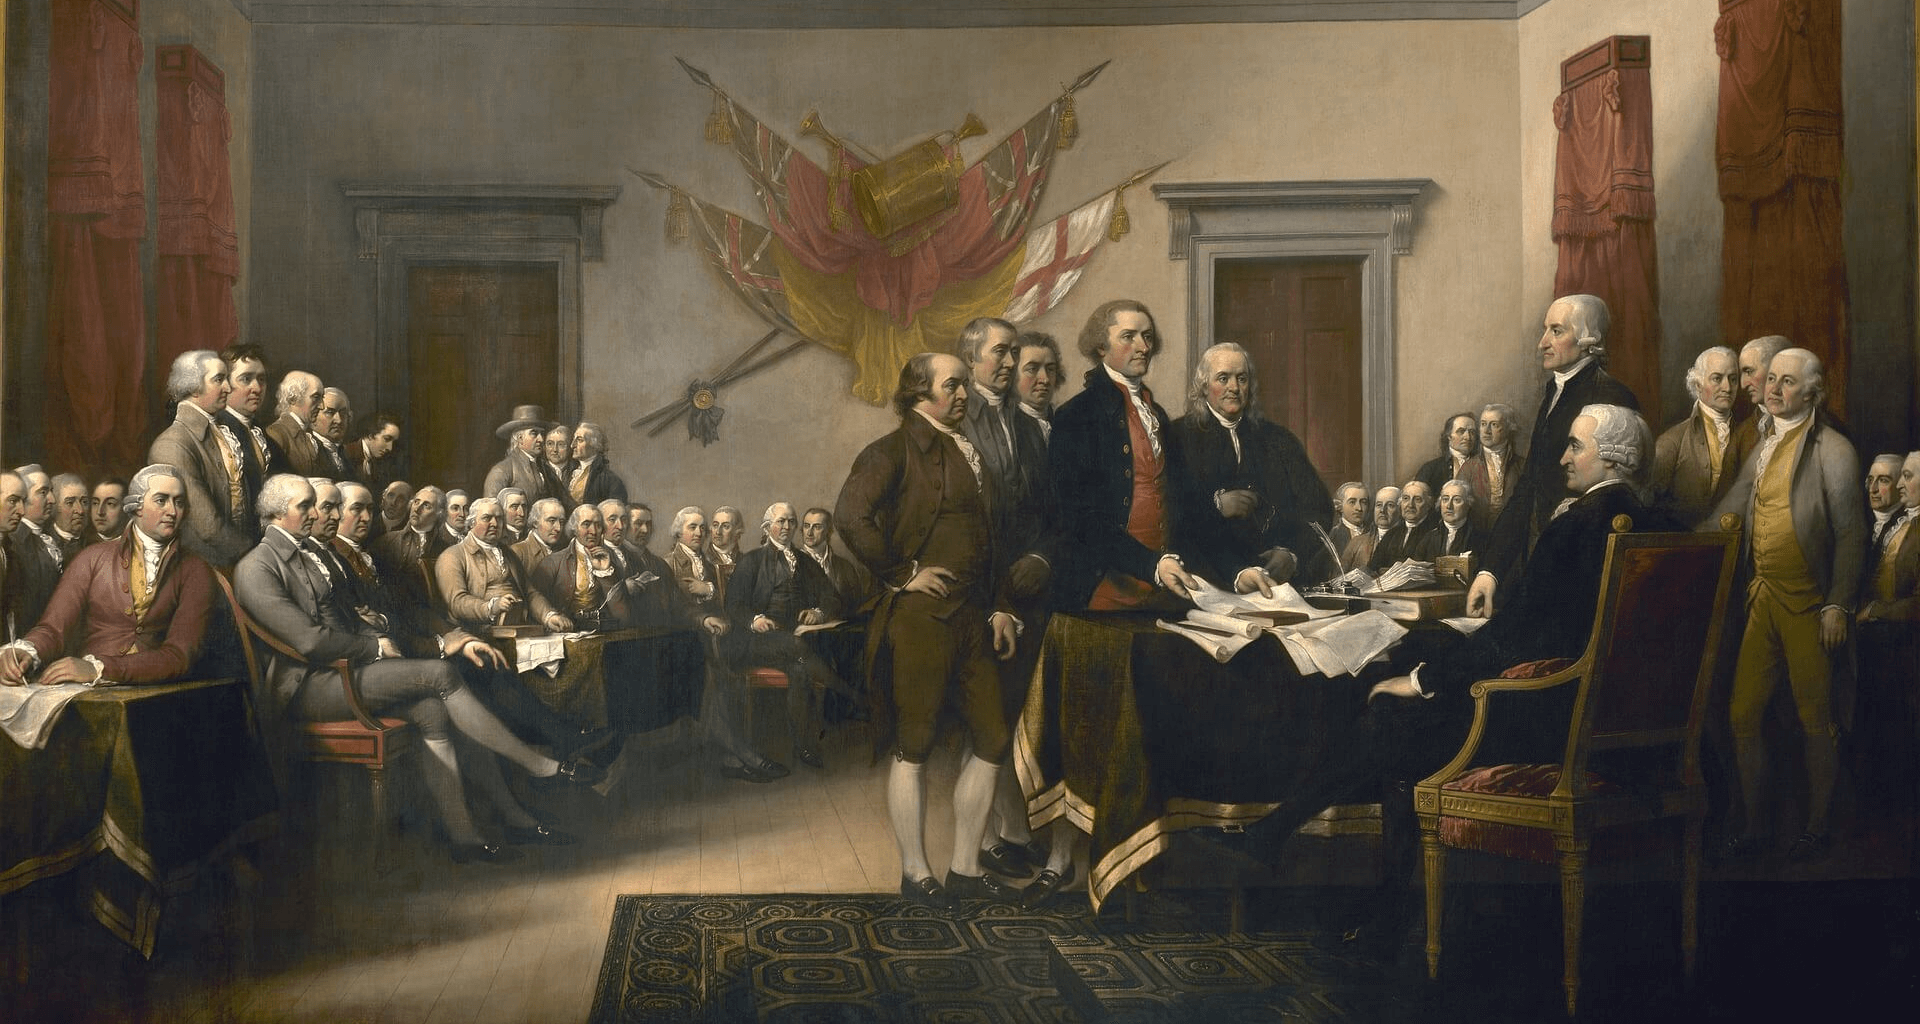 Declaration of Independence and National Handwriting Day